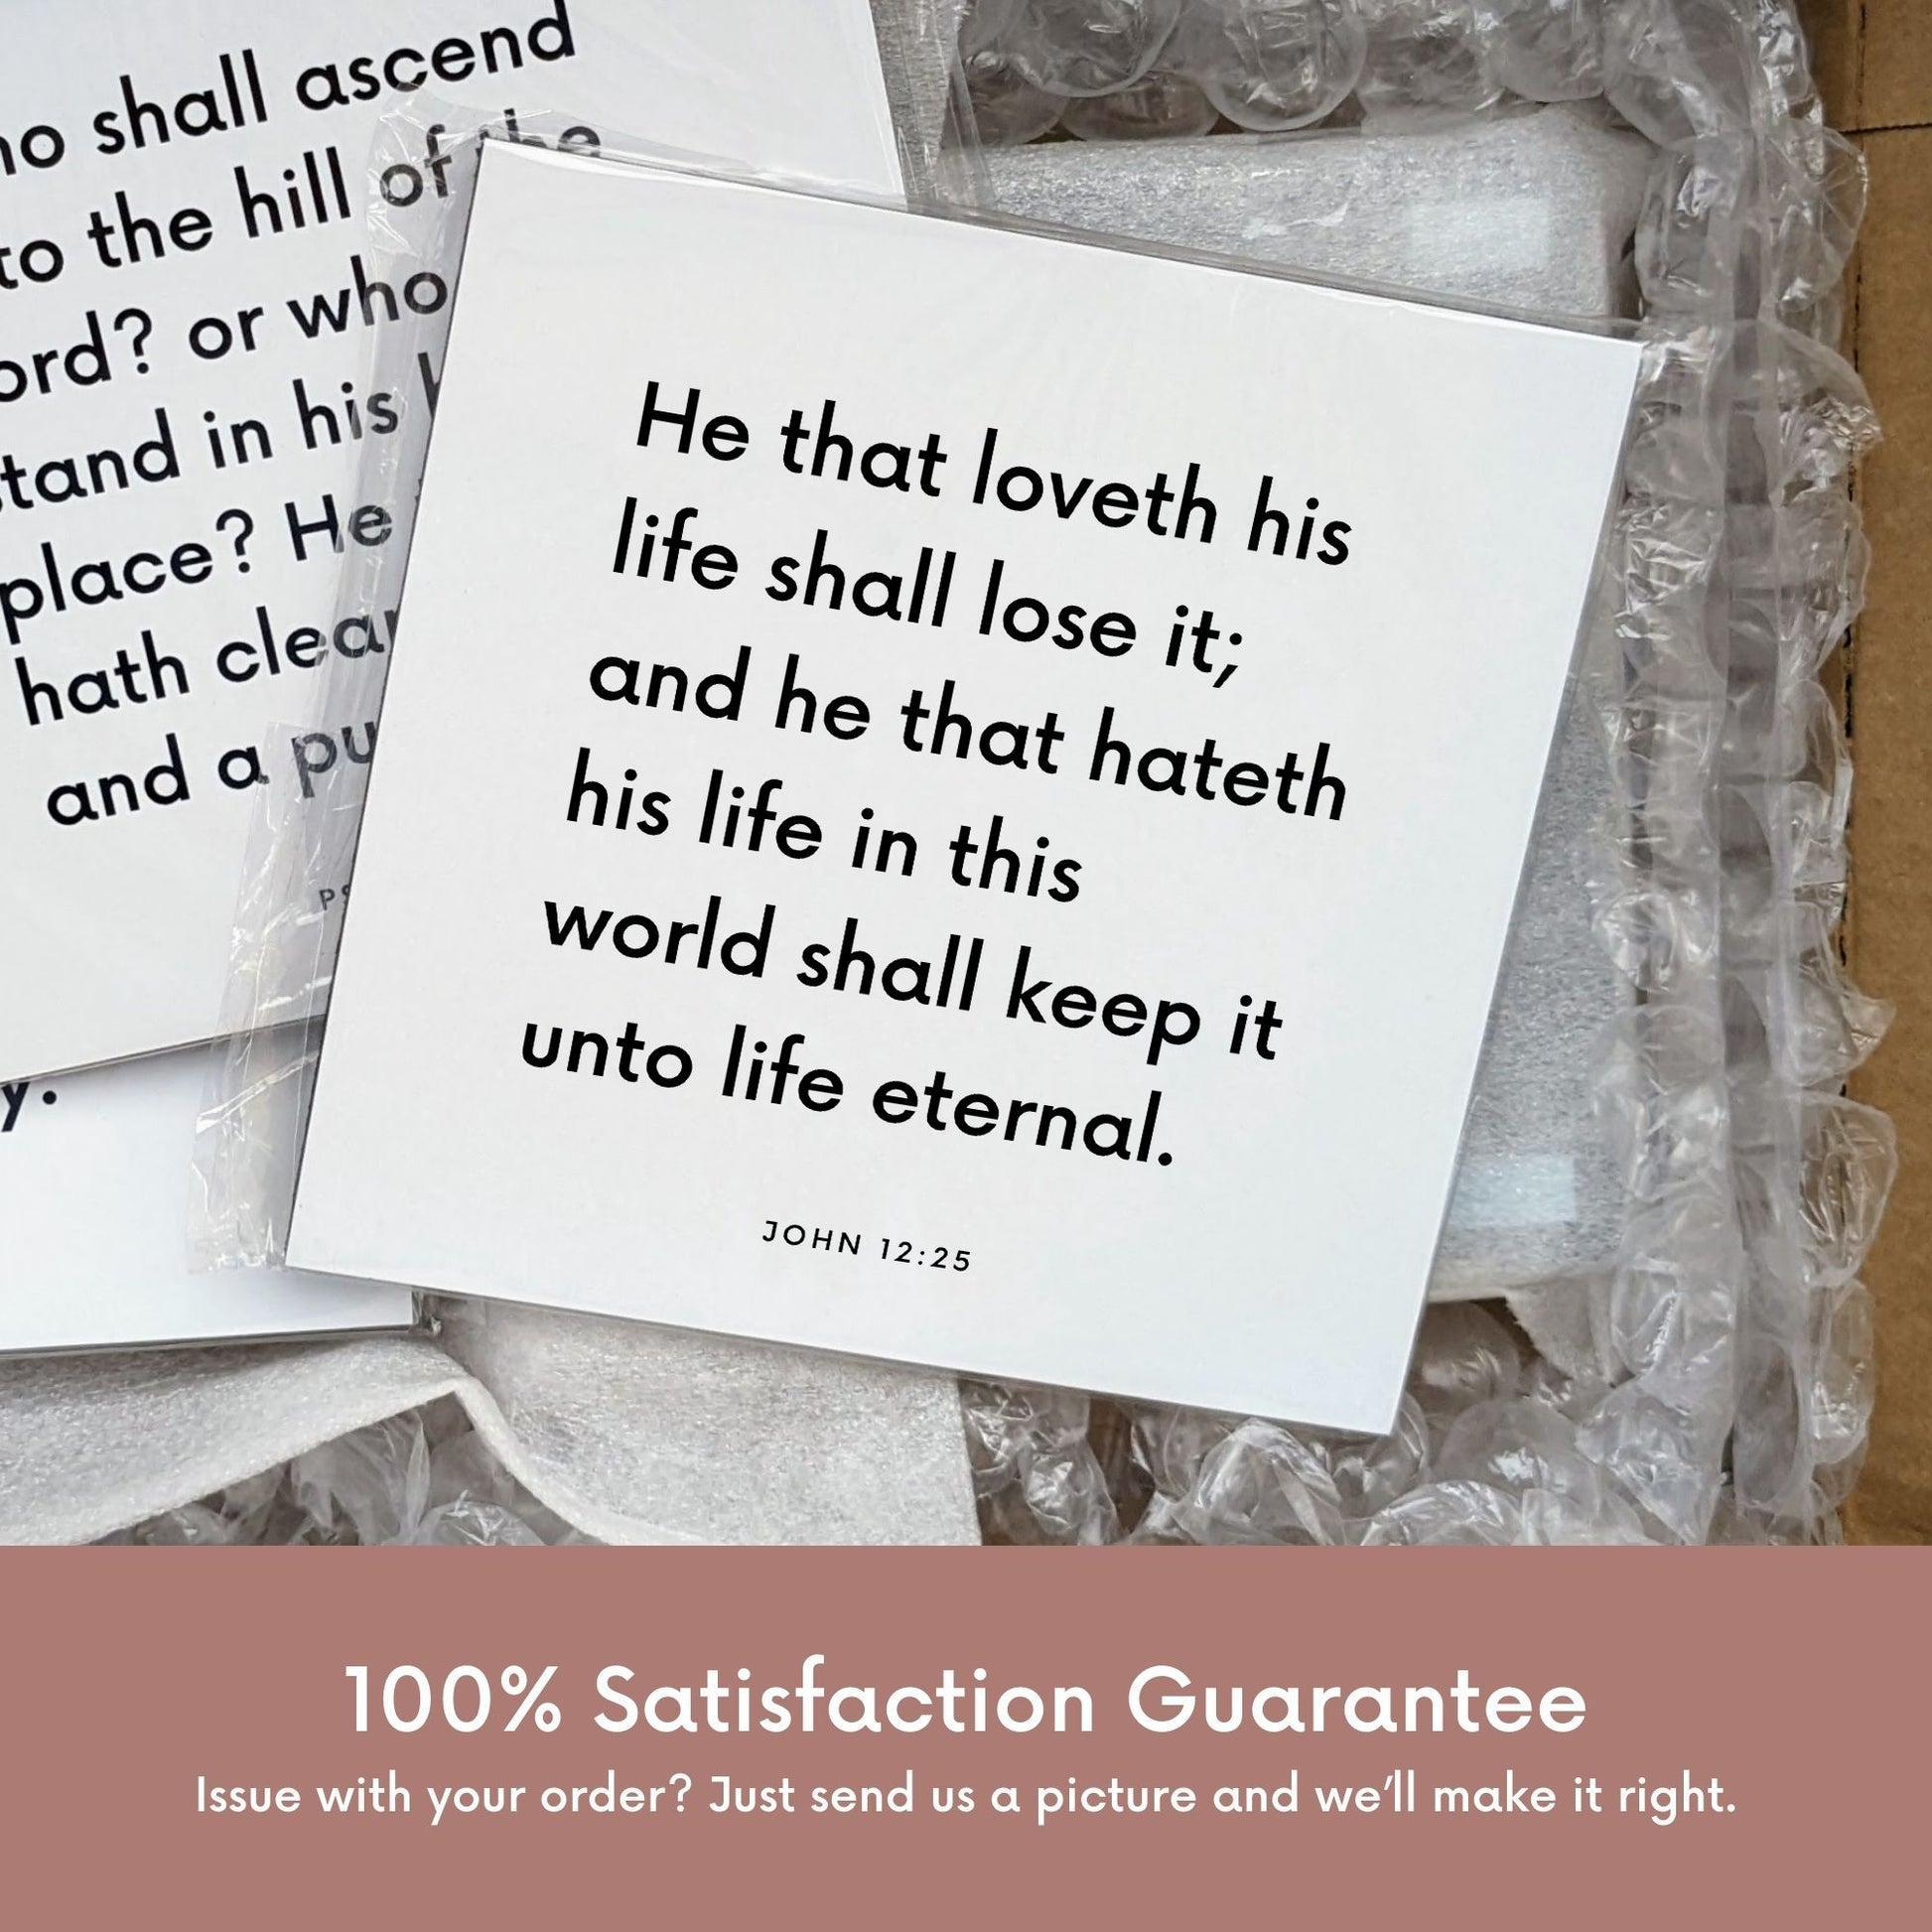 Shipping materials for scripture tile of John 12:25 - "He that loveth his life shall lose it"